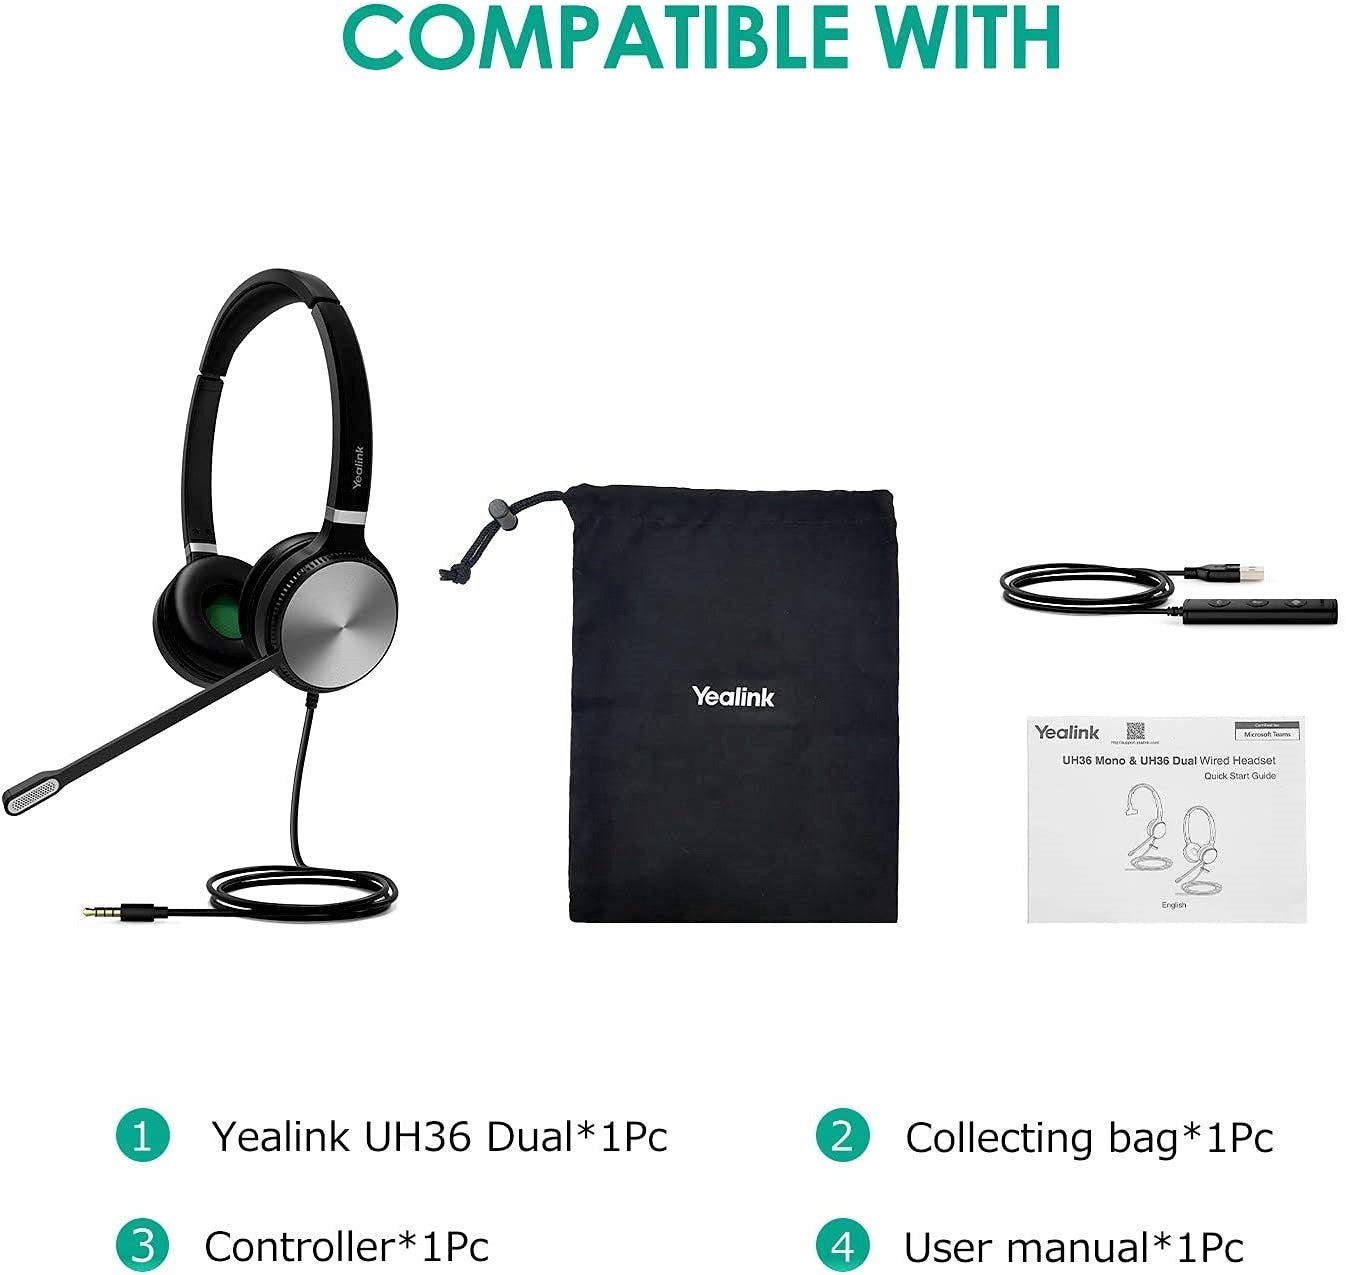 Yealink UH36 Dual USB-A Wired Headset - Features